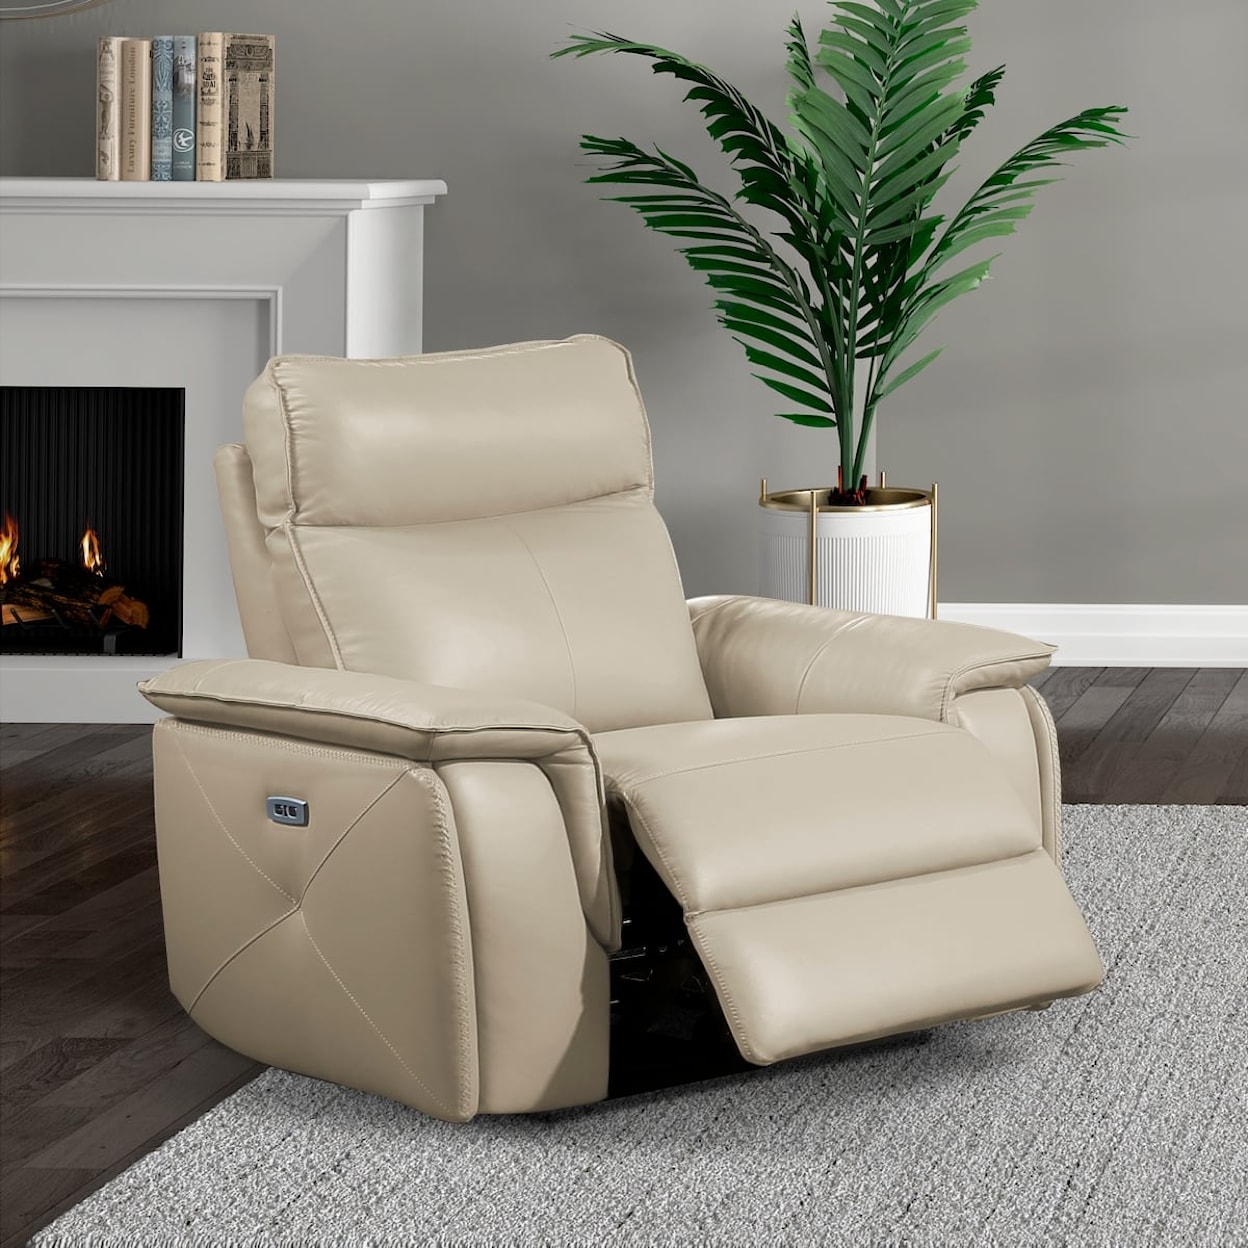 Homelegance Maroni Power Reclining Chair with Power Headrest